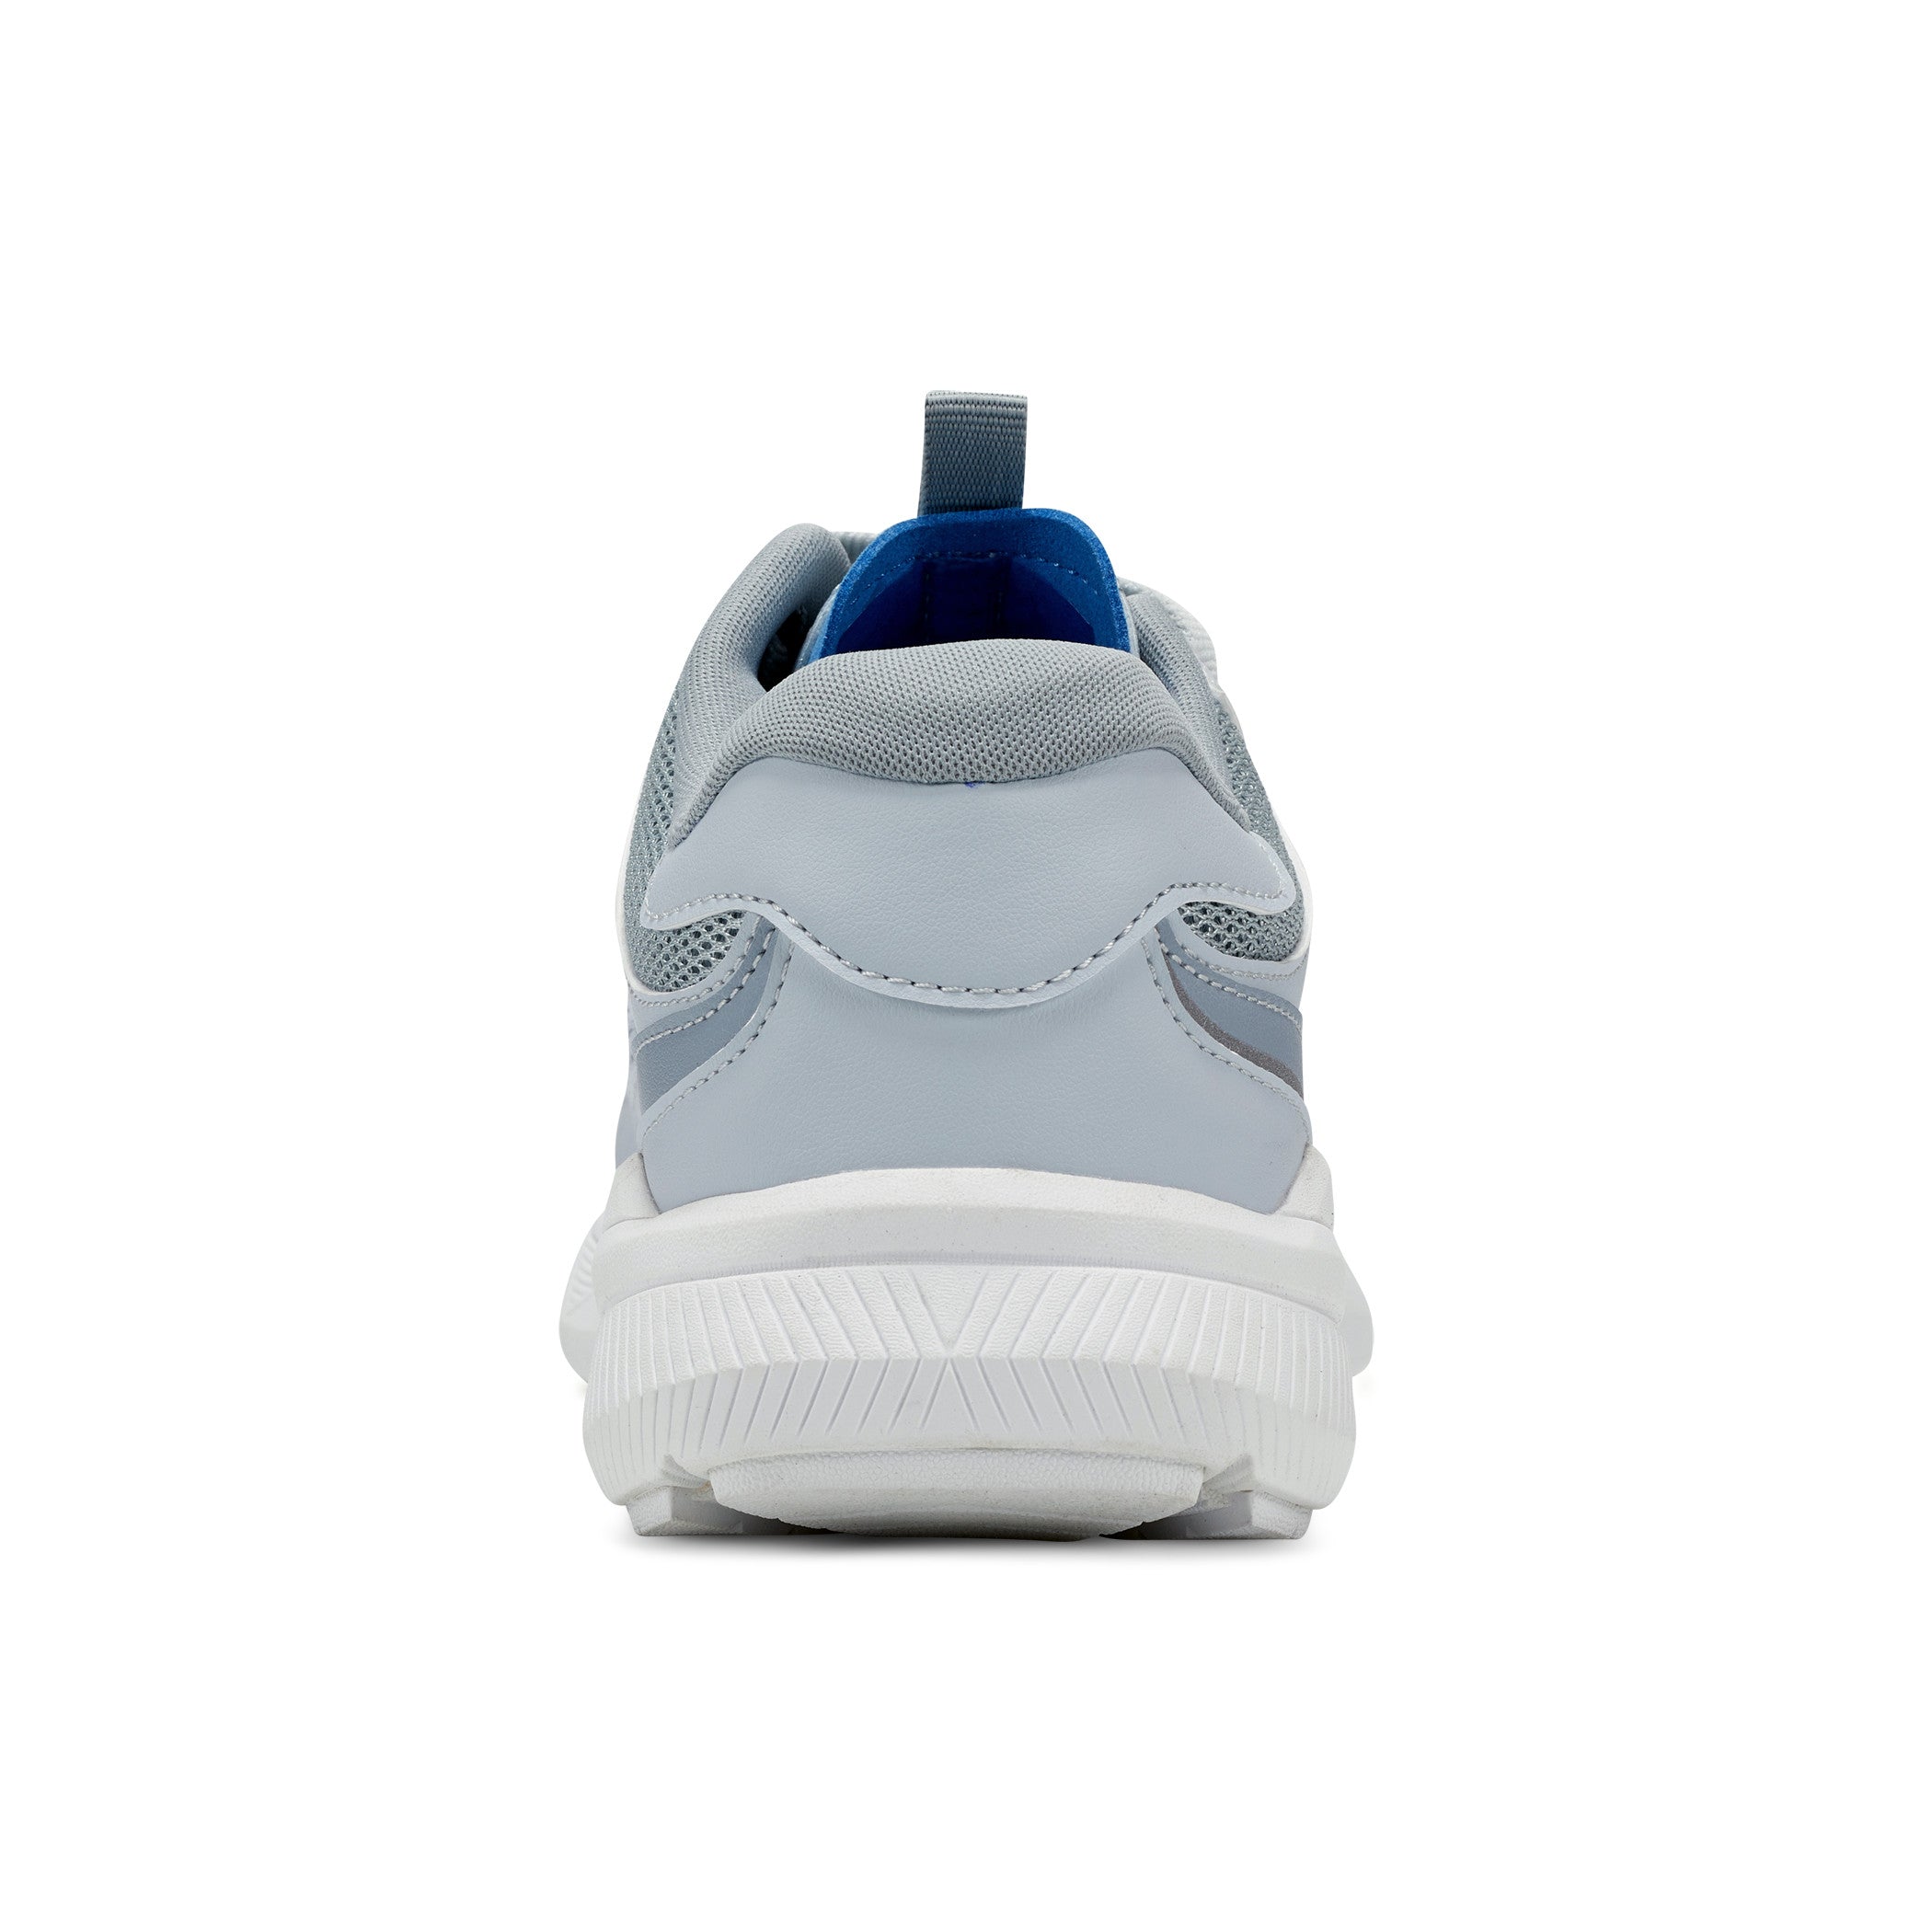 Foster EMOVE Walking Shoes